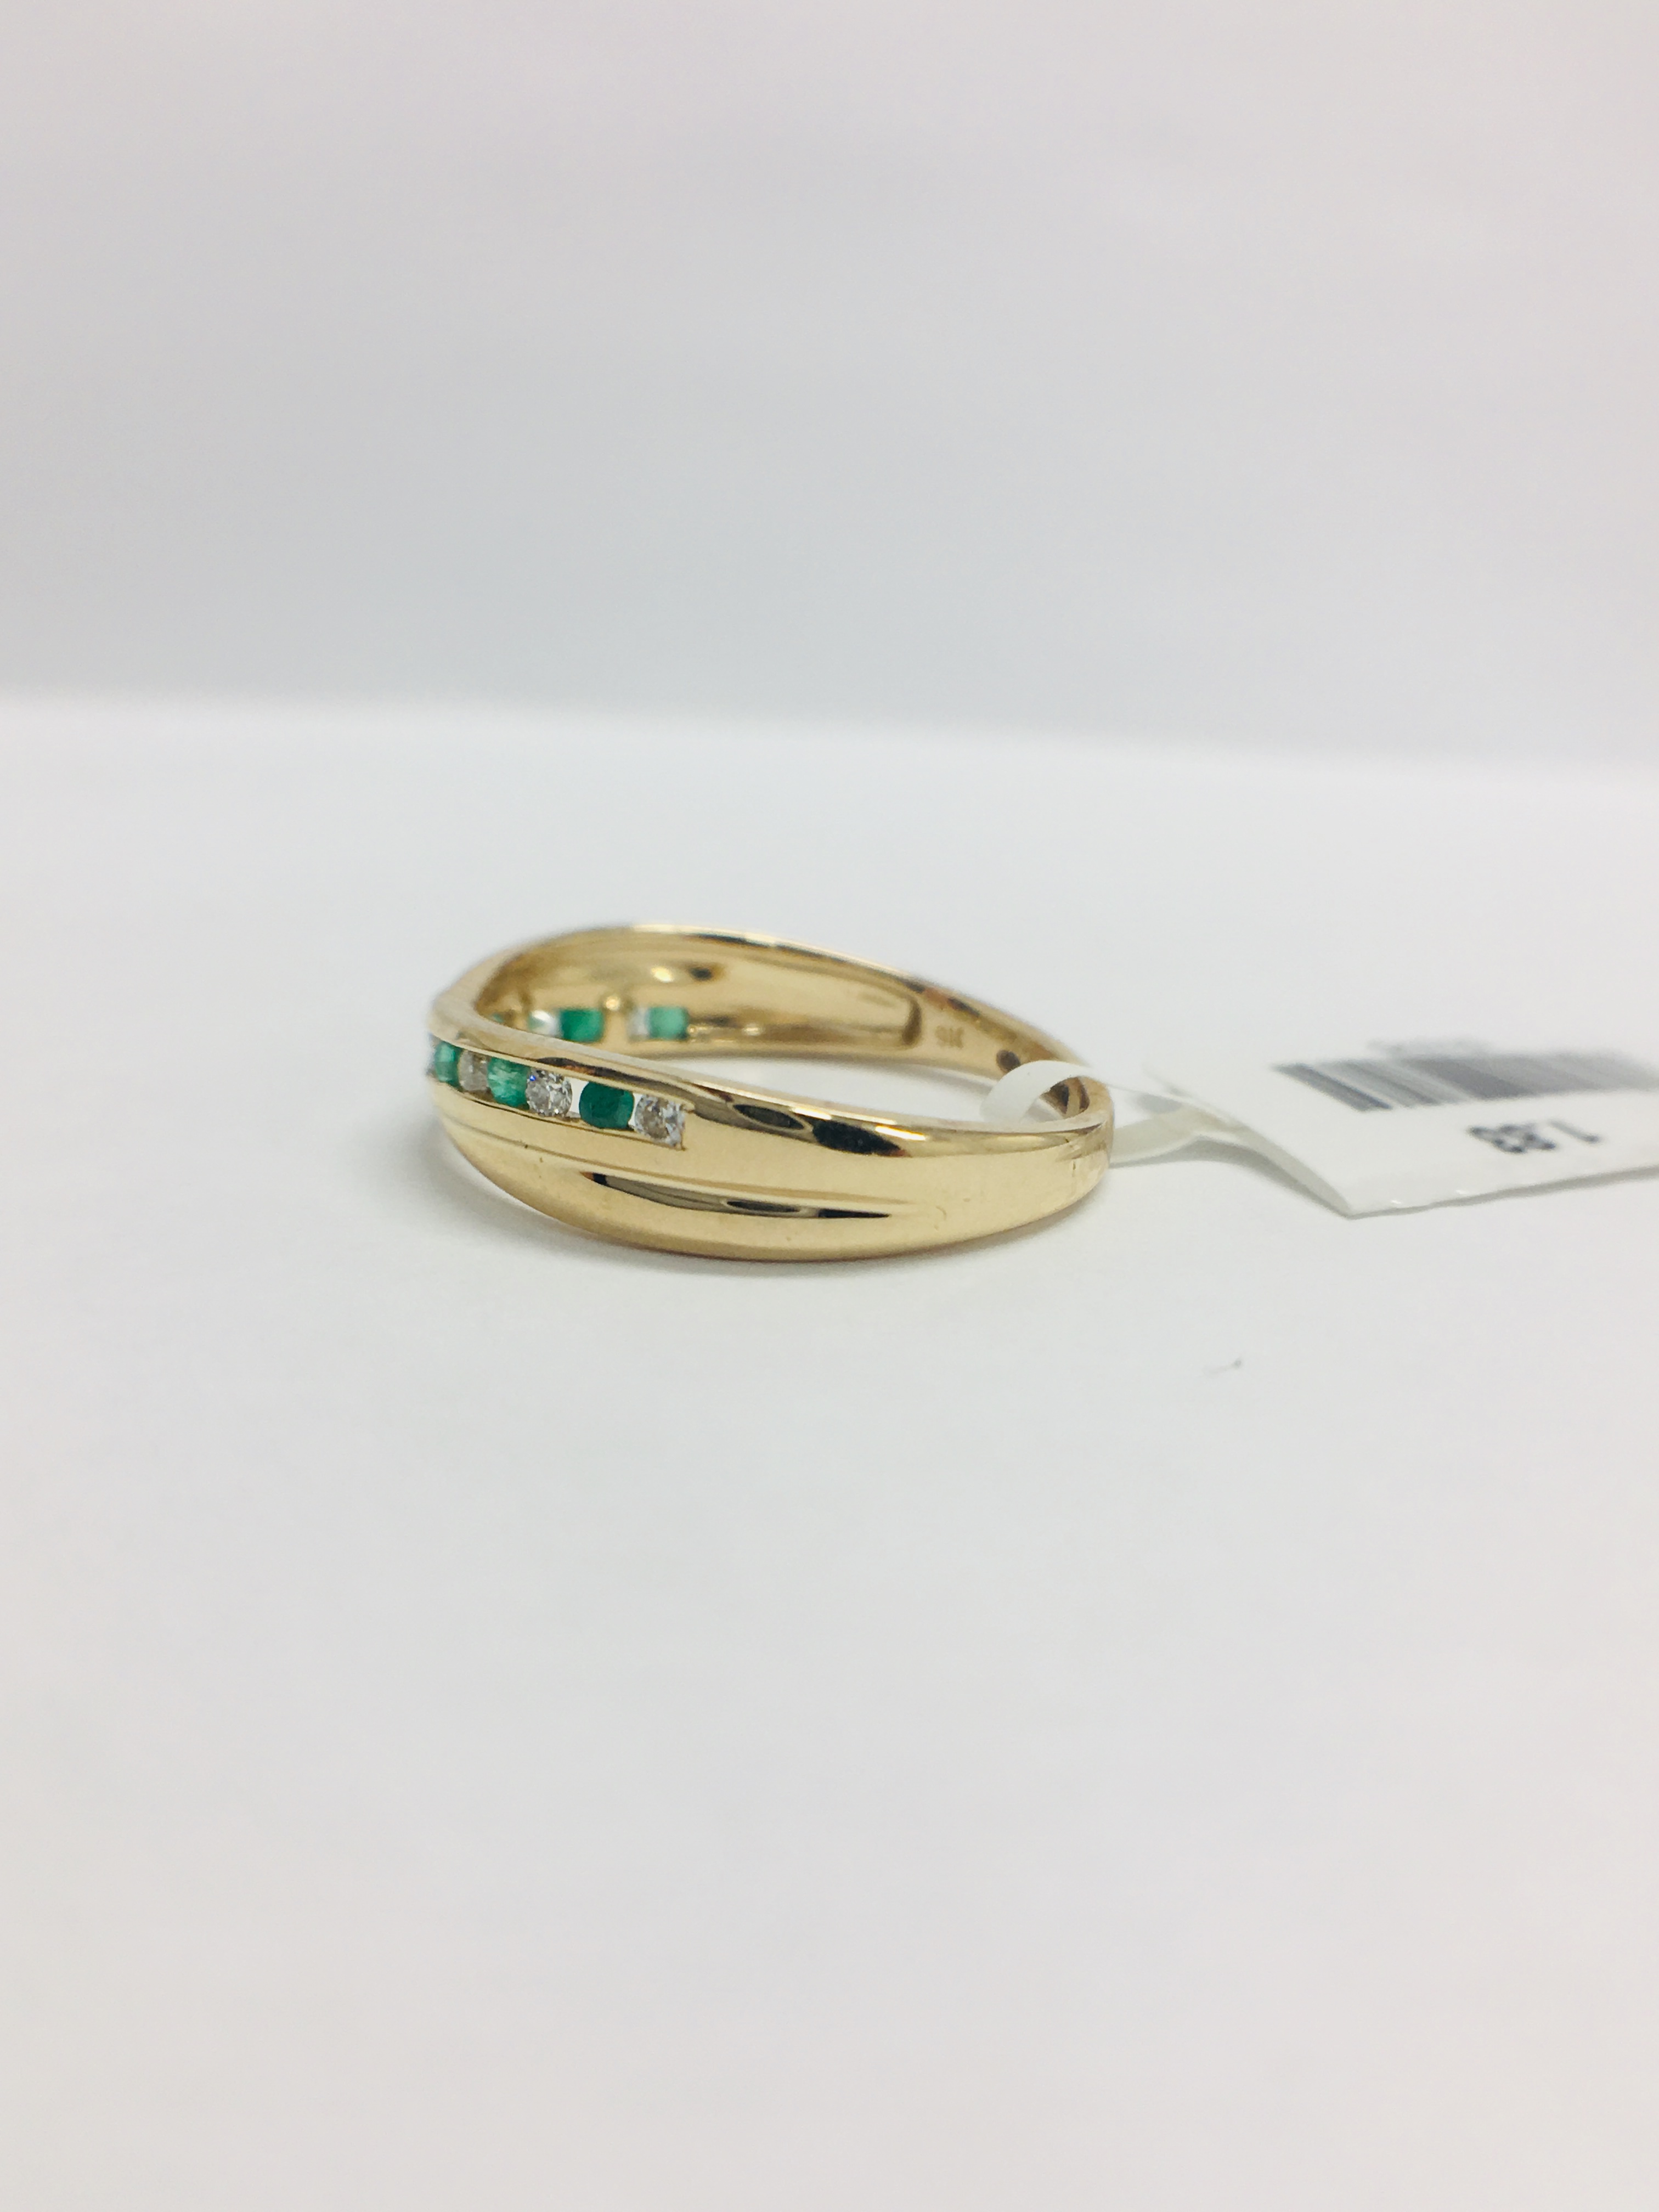 9Ct Yellow Gold Emerald Diamond Crossover Band Ring, - Image 4 of 11